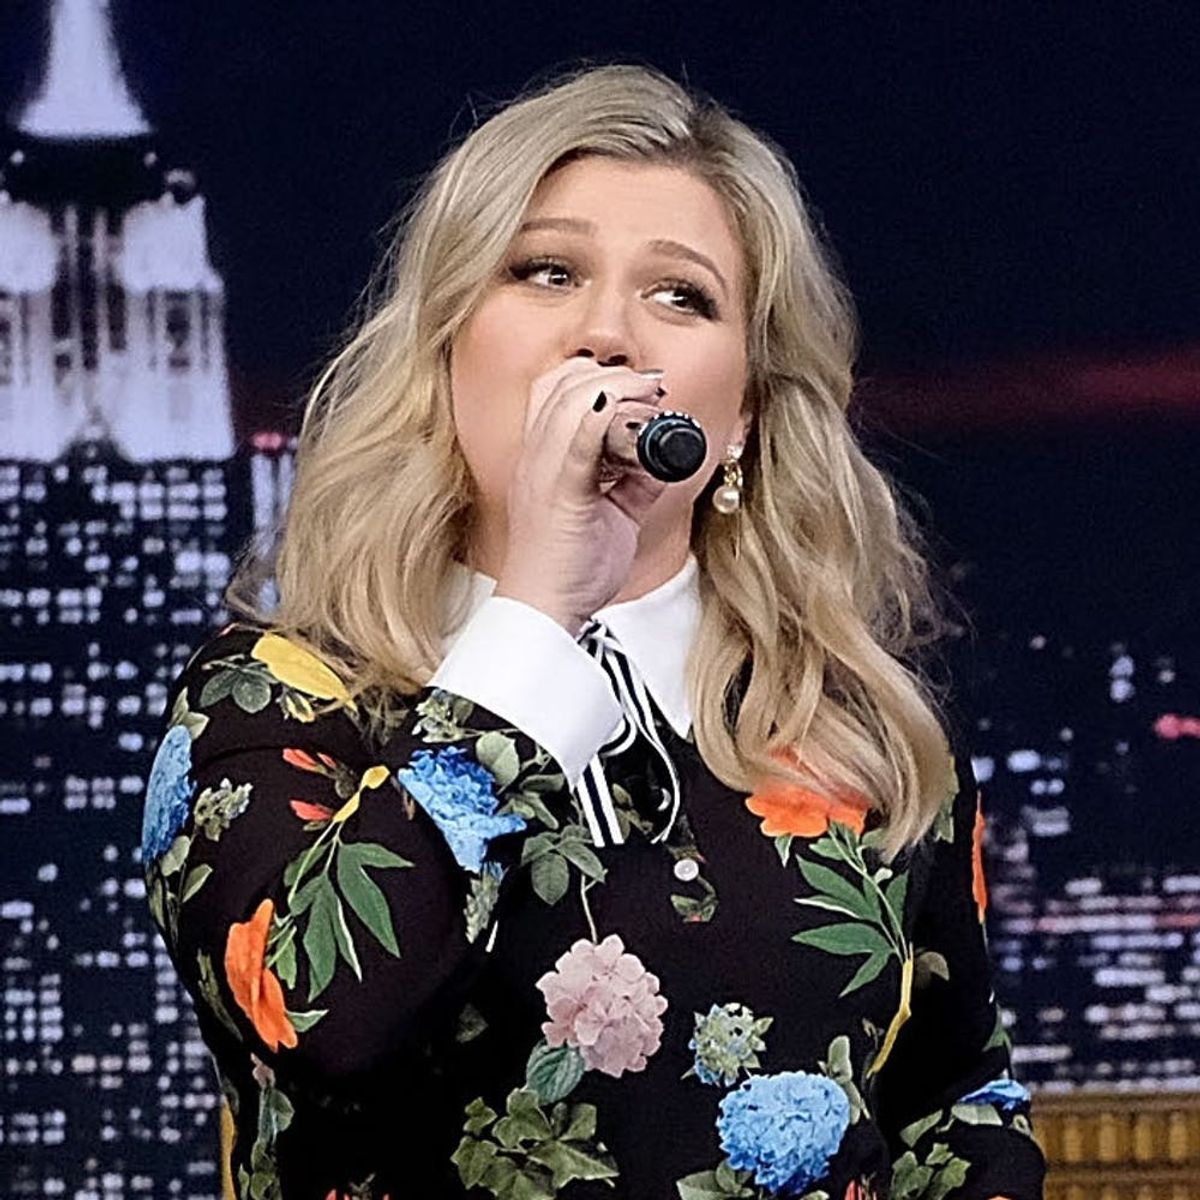 Kelly Clarkson Sang a Google-Translated Version of ‘Stronger’ and We Can’t Stop Laughing